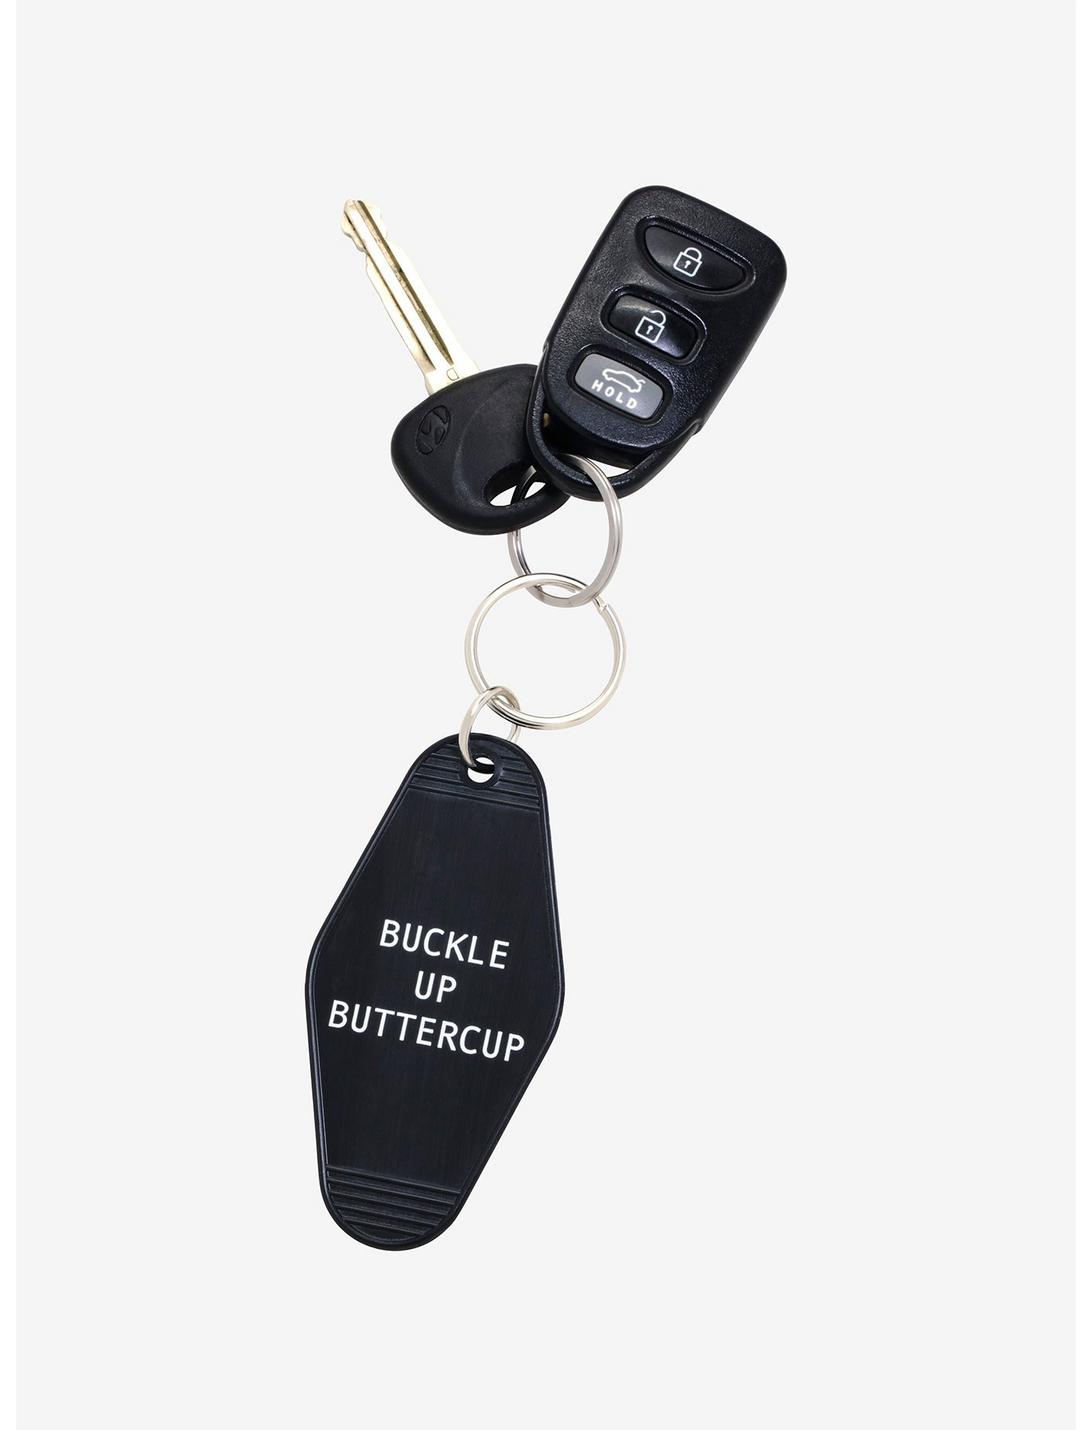 Buckle Up Buttercup Hotel Key Chain, , hi-res